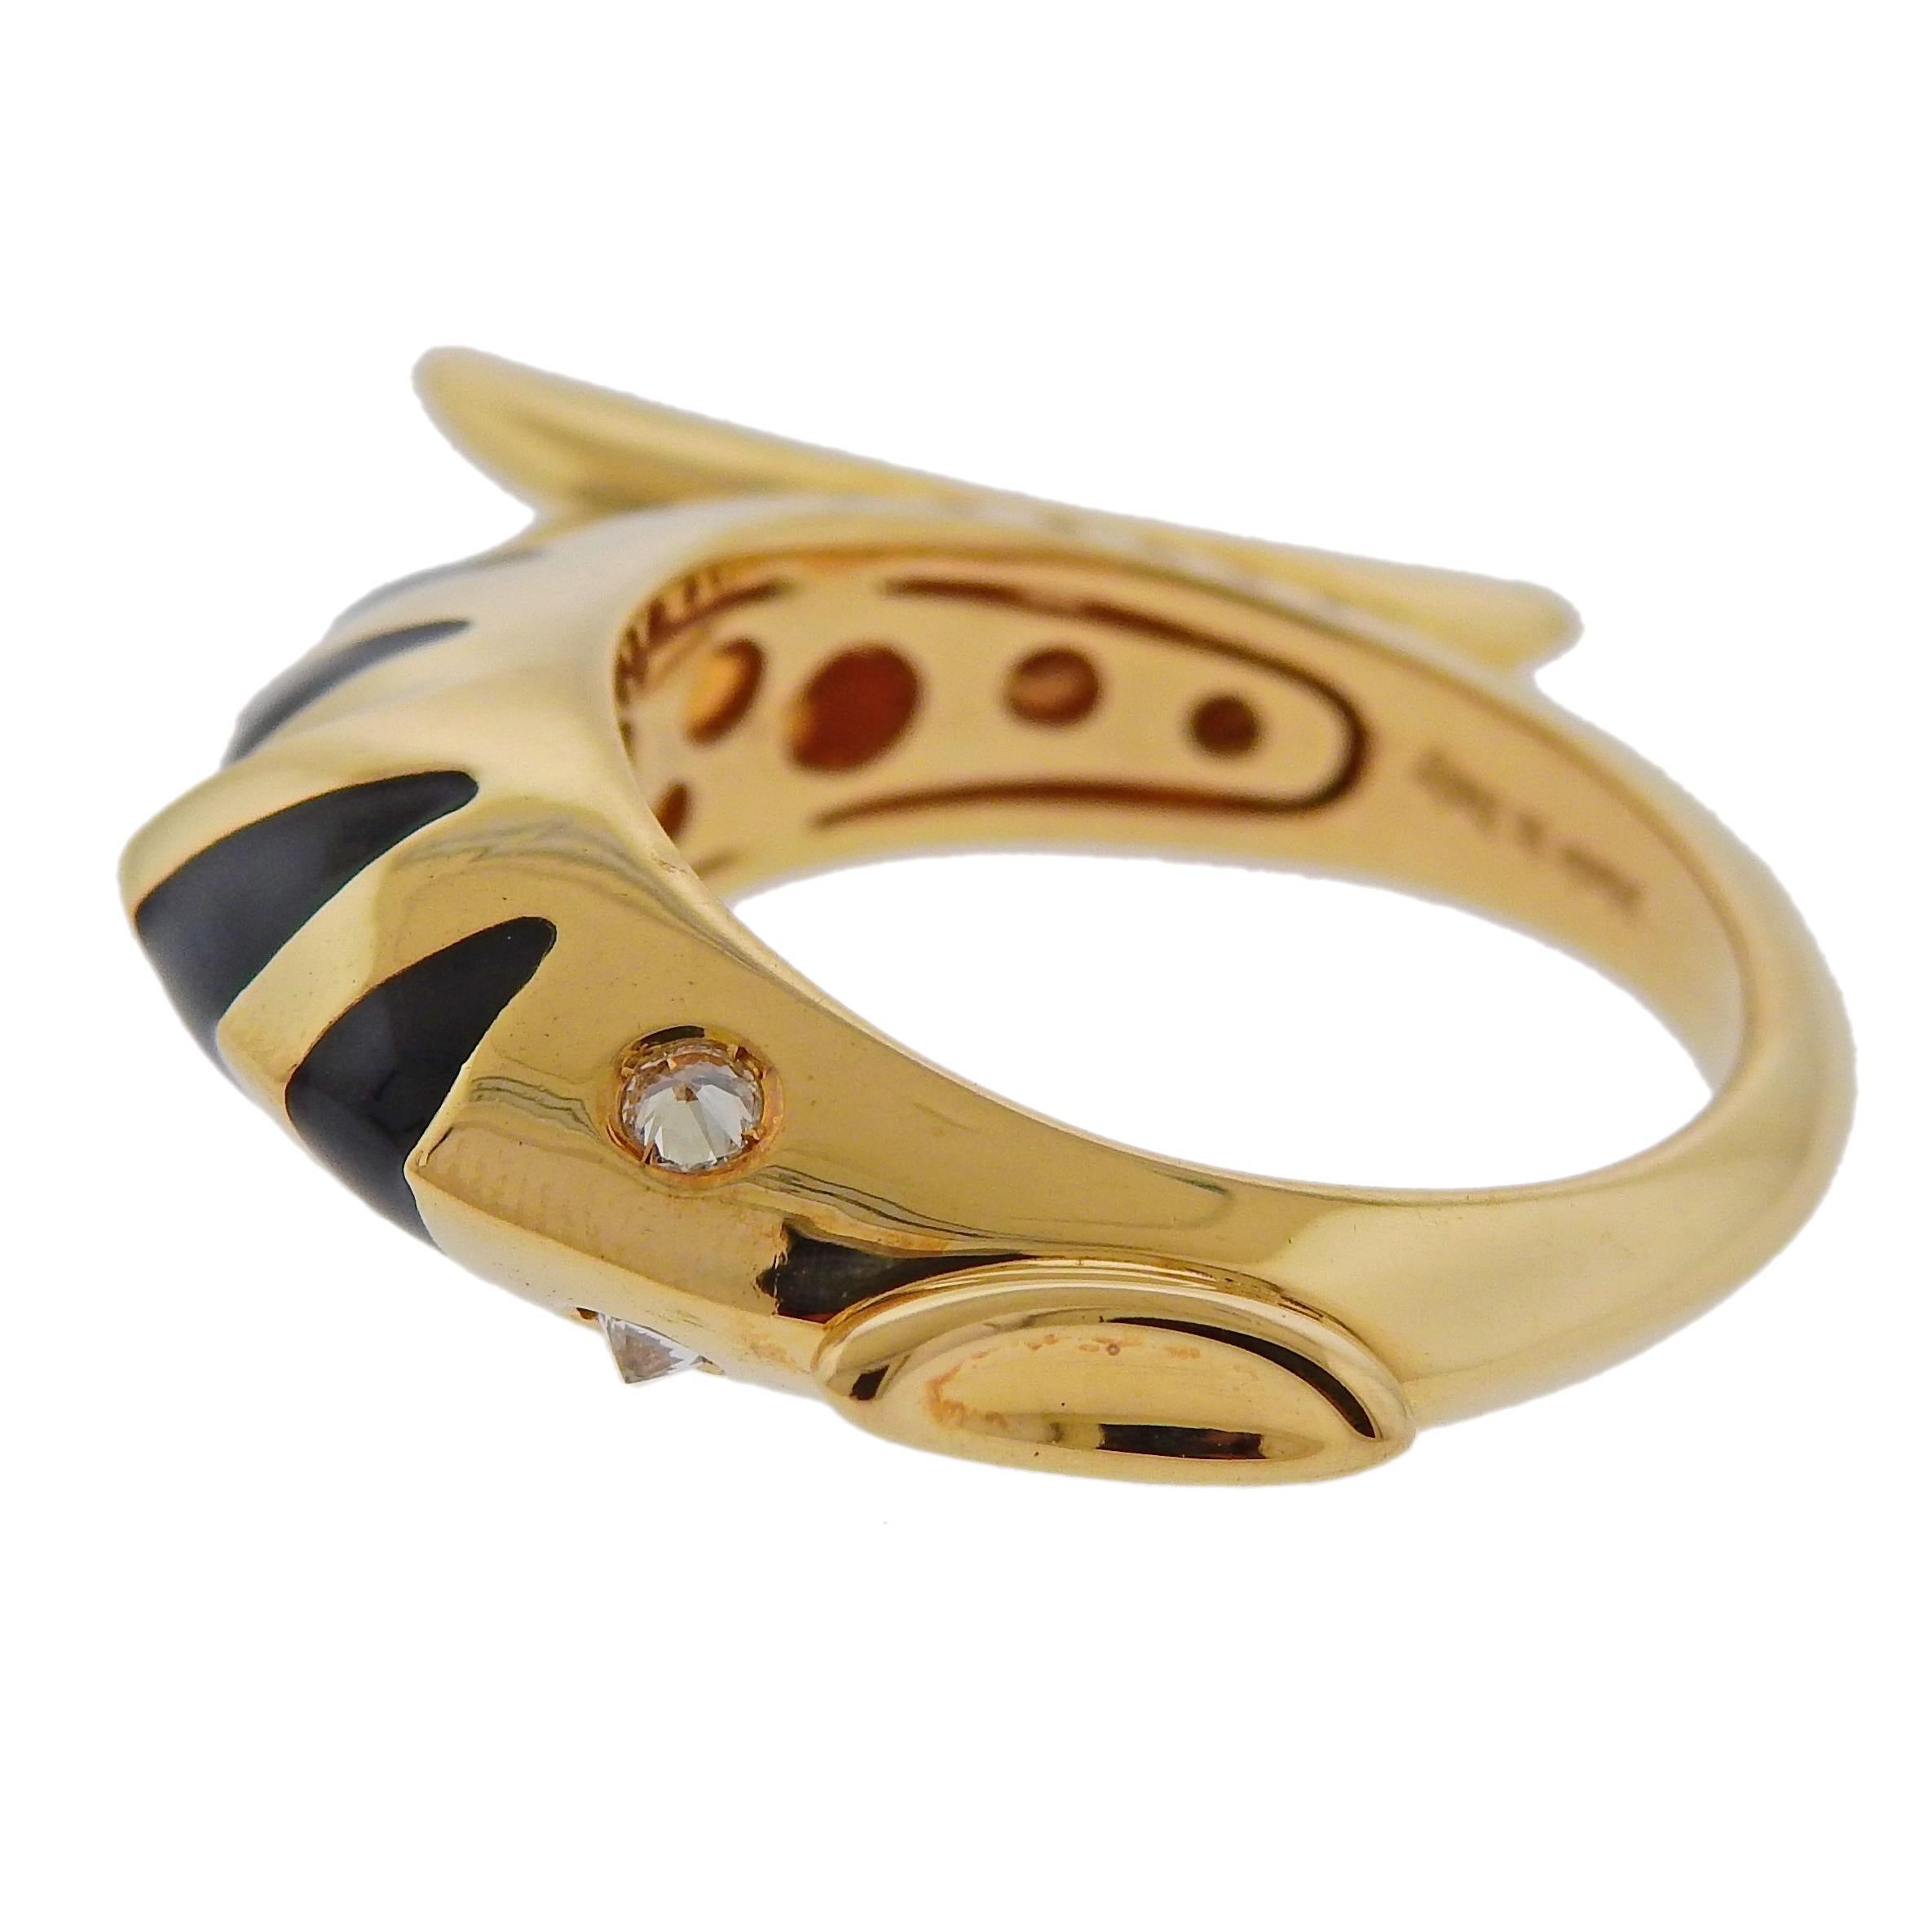 Unique 18k gold fish ring by Roberta Porrati, decorated with enamel and approx. 0.08ctw in G/VS diamonds. Ring size - 7.5, widest point 7.6mm. Weighs 10.5 grams. marked: Porrati, made in Italy, 750, Italian mark. 